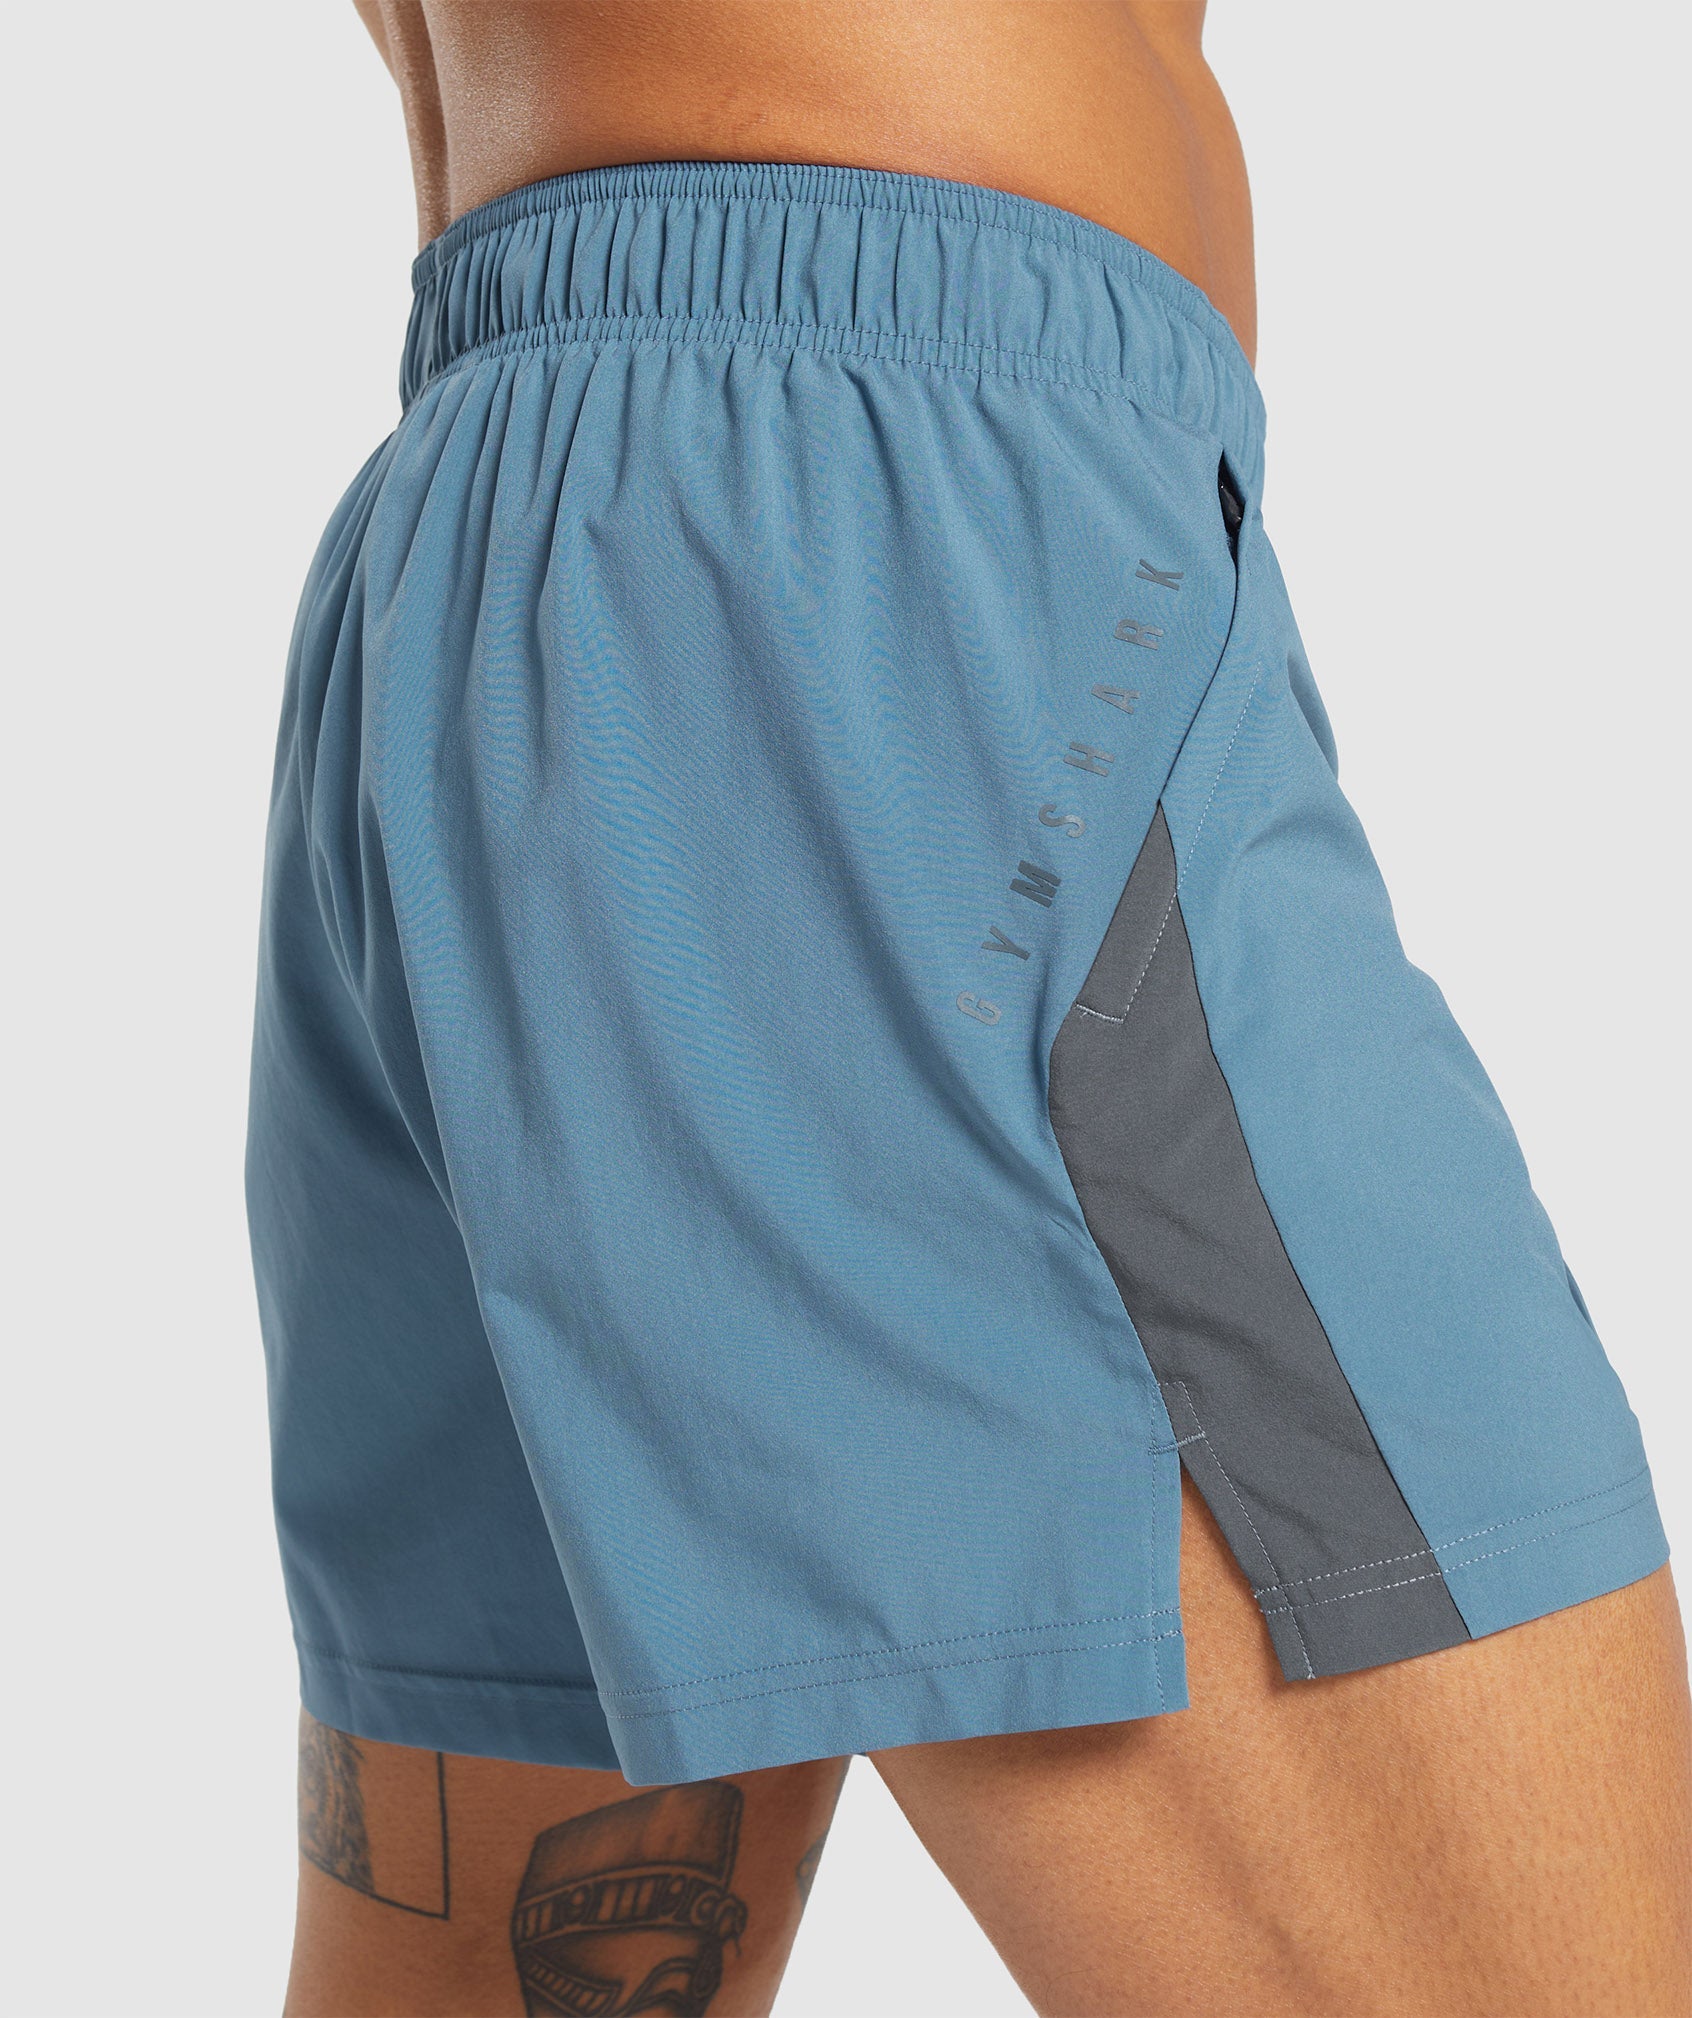 Sport 5" Shorts in Faded Blue/Titanium Blue - view 7